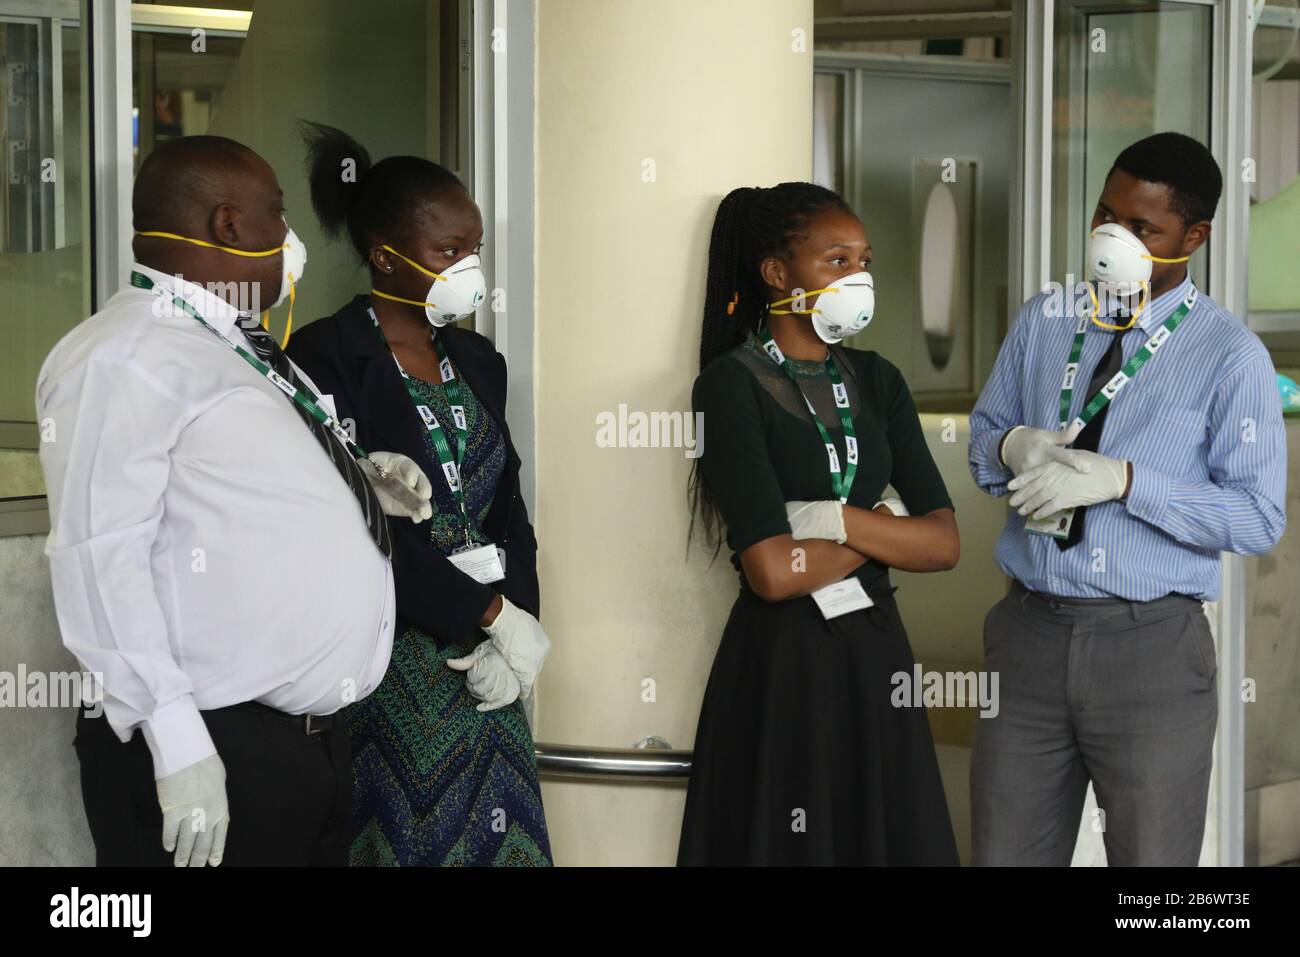 (200312) -- HARARE, March 12, 2020 (Xinhua) -- Staff wearing face masks work at the Robert Gabriel Mugabe International Airport in Harare, Zimbabwe, March 11, 2020. Zimbabwe's main airport is '60 percent prepared' to deal with COVID-19 and more resources are required for training and procurement of essential protective equipment for critical staff, Ruth Labode, chairperson of the parliamentary portfolio committee on health said Wednesday, after touring the Robert Gabriel Mugabe International Airport in Harare to assess its preparedness to deal with the virus. (Photo by Shaun Jusa/Xinhua) Stock Photo